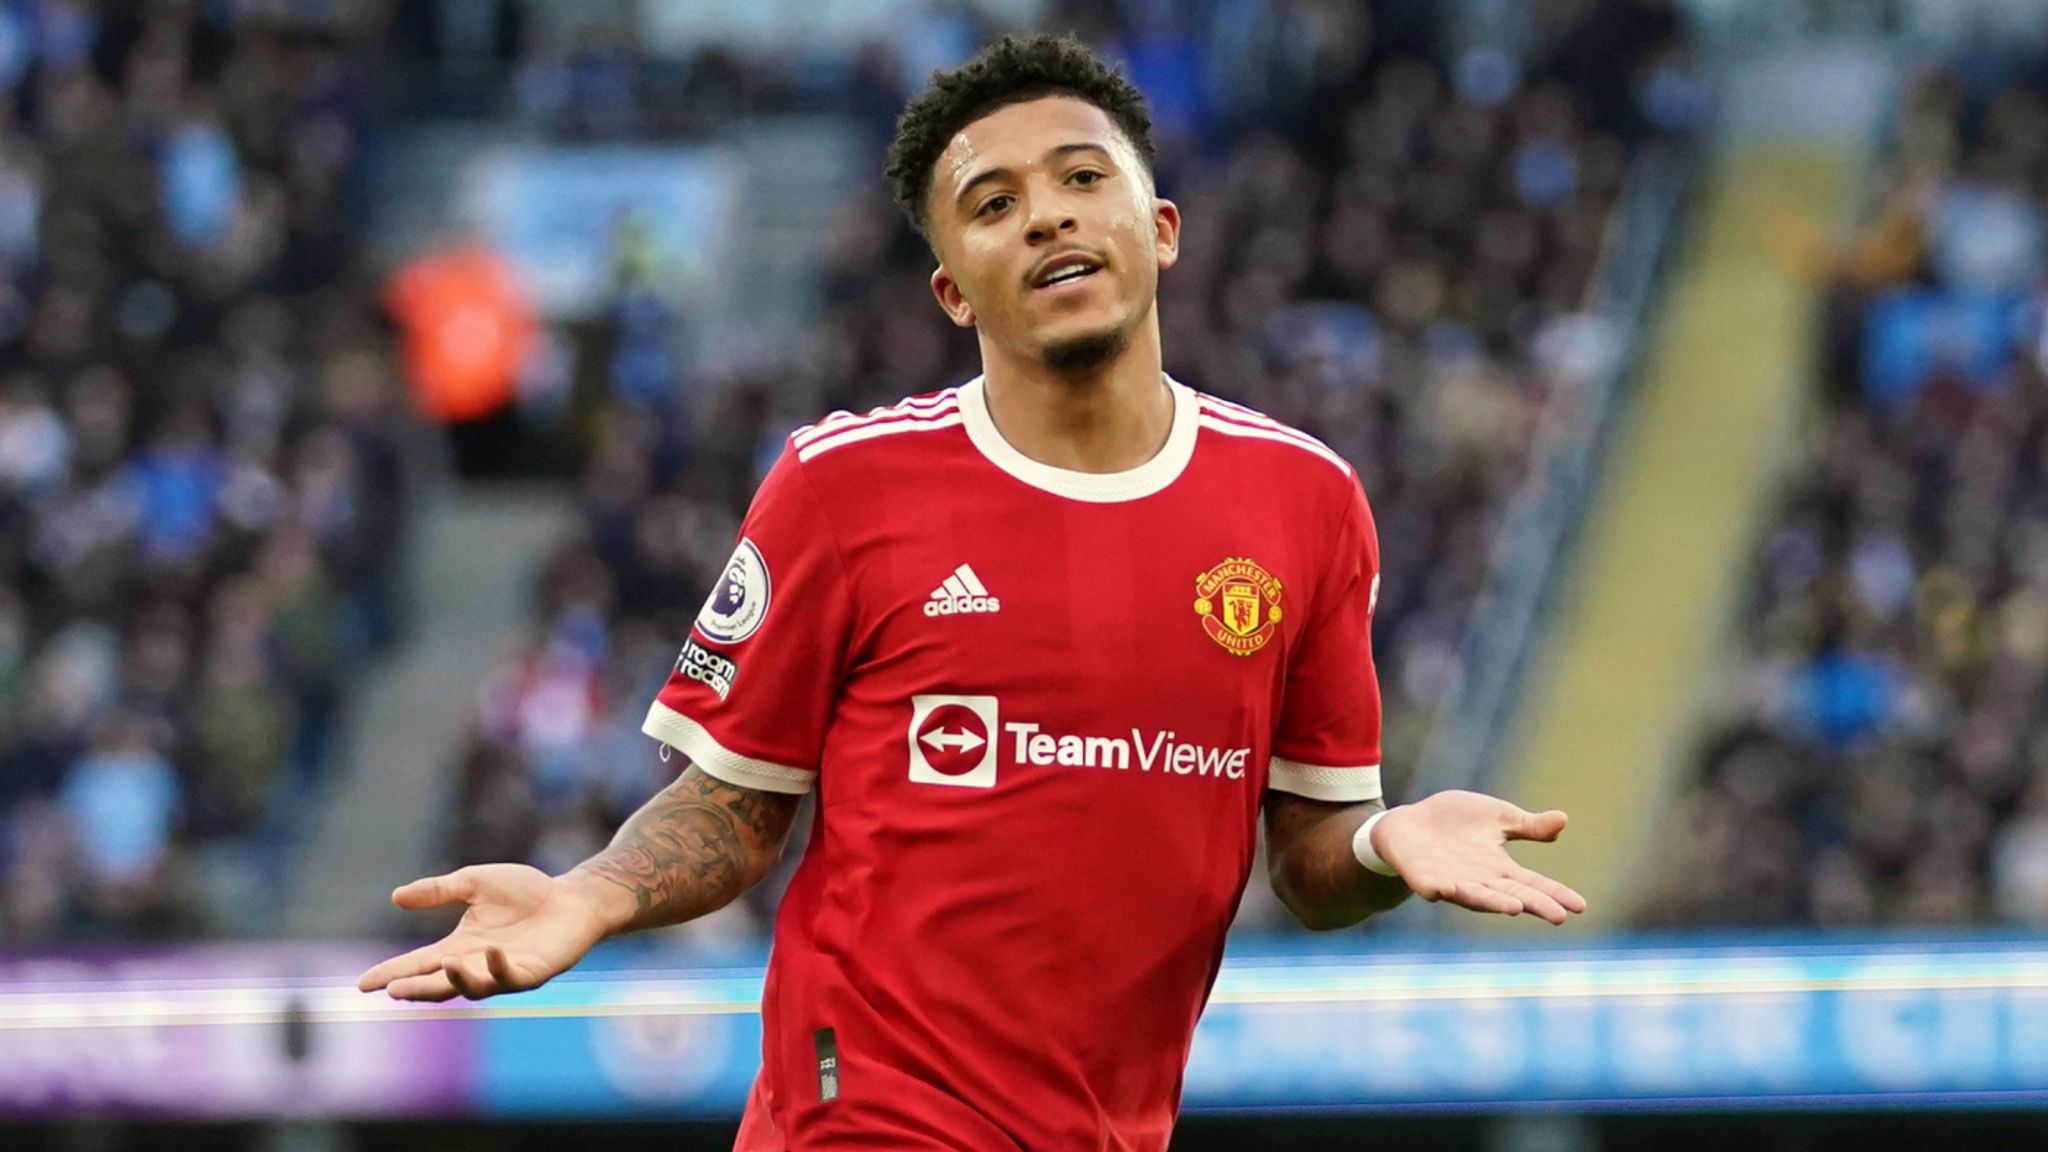 Jadon Sancho approaching best Manchester United form, says Ralf Rangnick as  Bruno Fernandes faces fitness race | Football News | Sky Sports